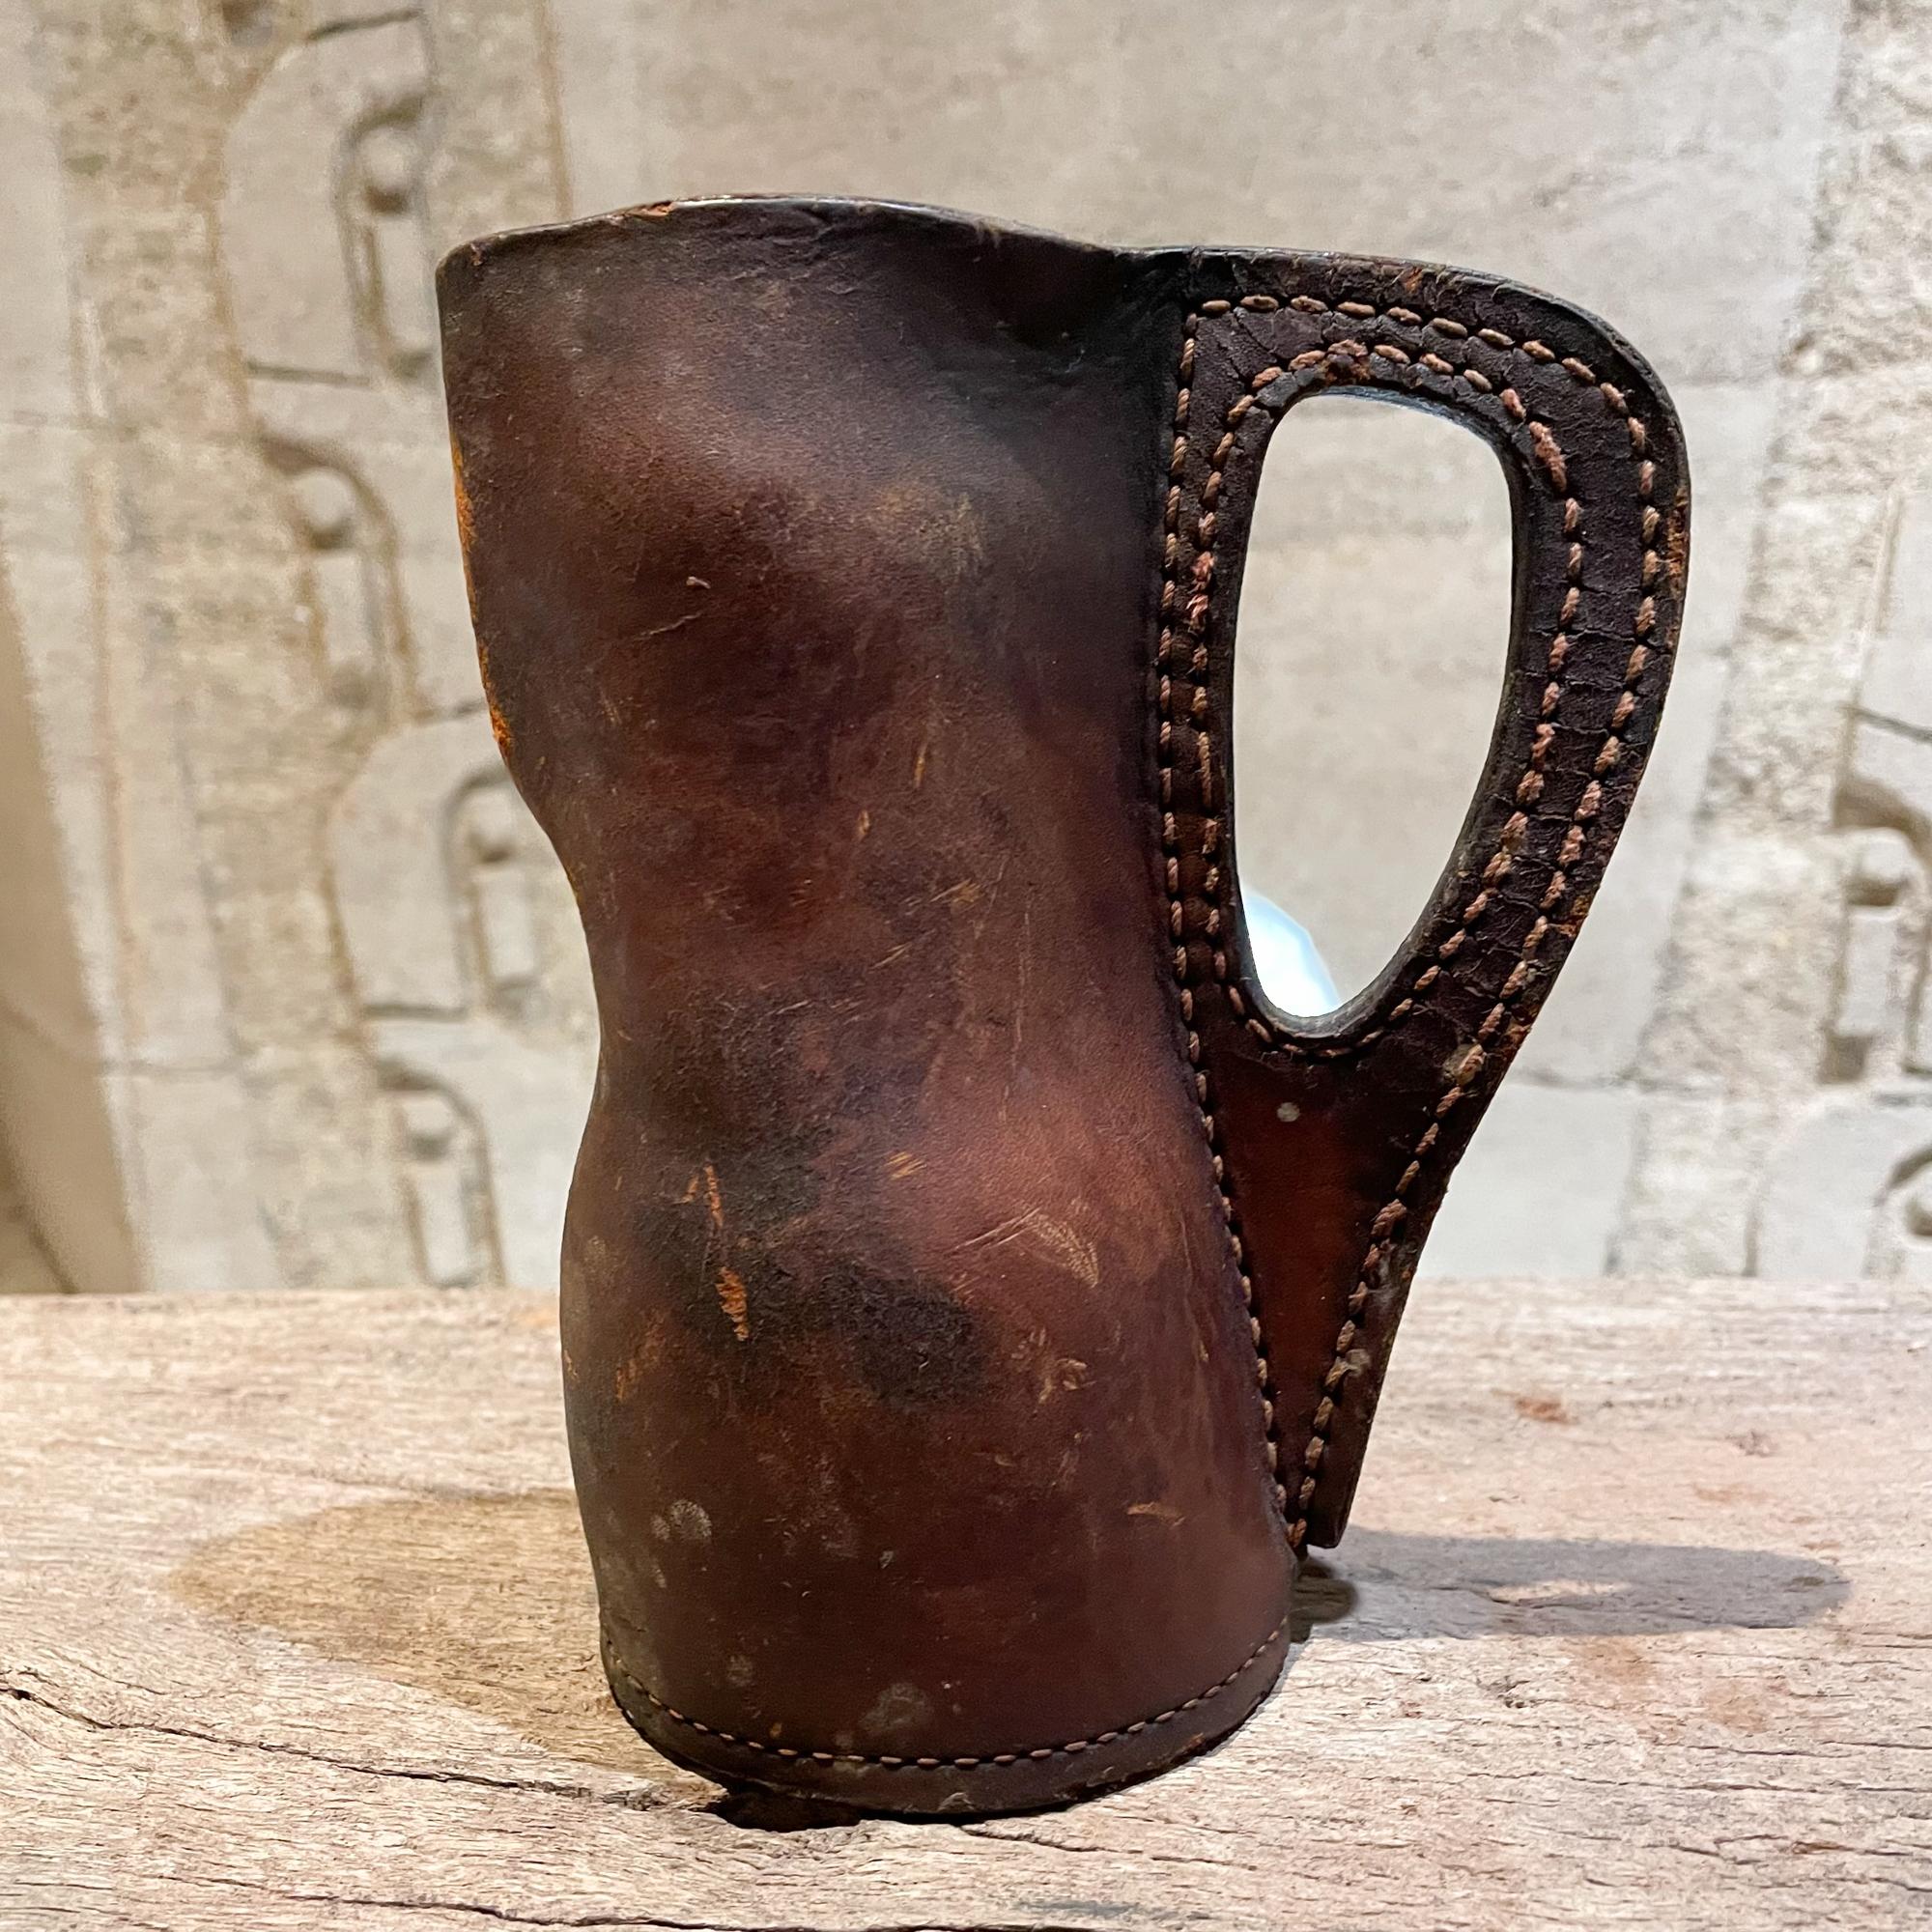 Antique handcrafted saddle leather Blackjack Pitcher jug vessel with contrast stitching 
Unmarked.
In the style of Hermes and Jacques Adnet.
Measures: 6.75 H x 5.25 D x 3.25 W inches
Original unrestored preowned condition. Untested vintage item.